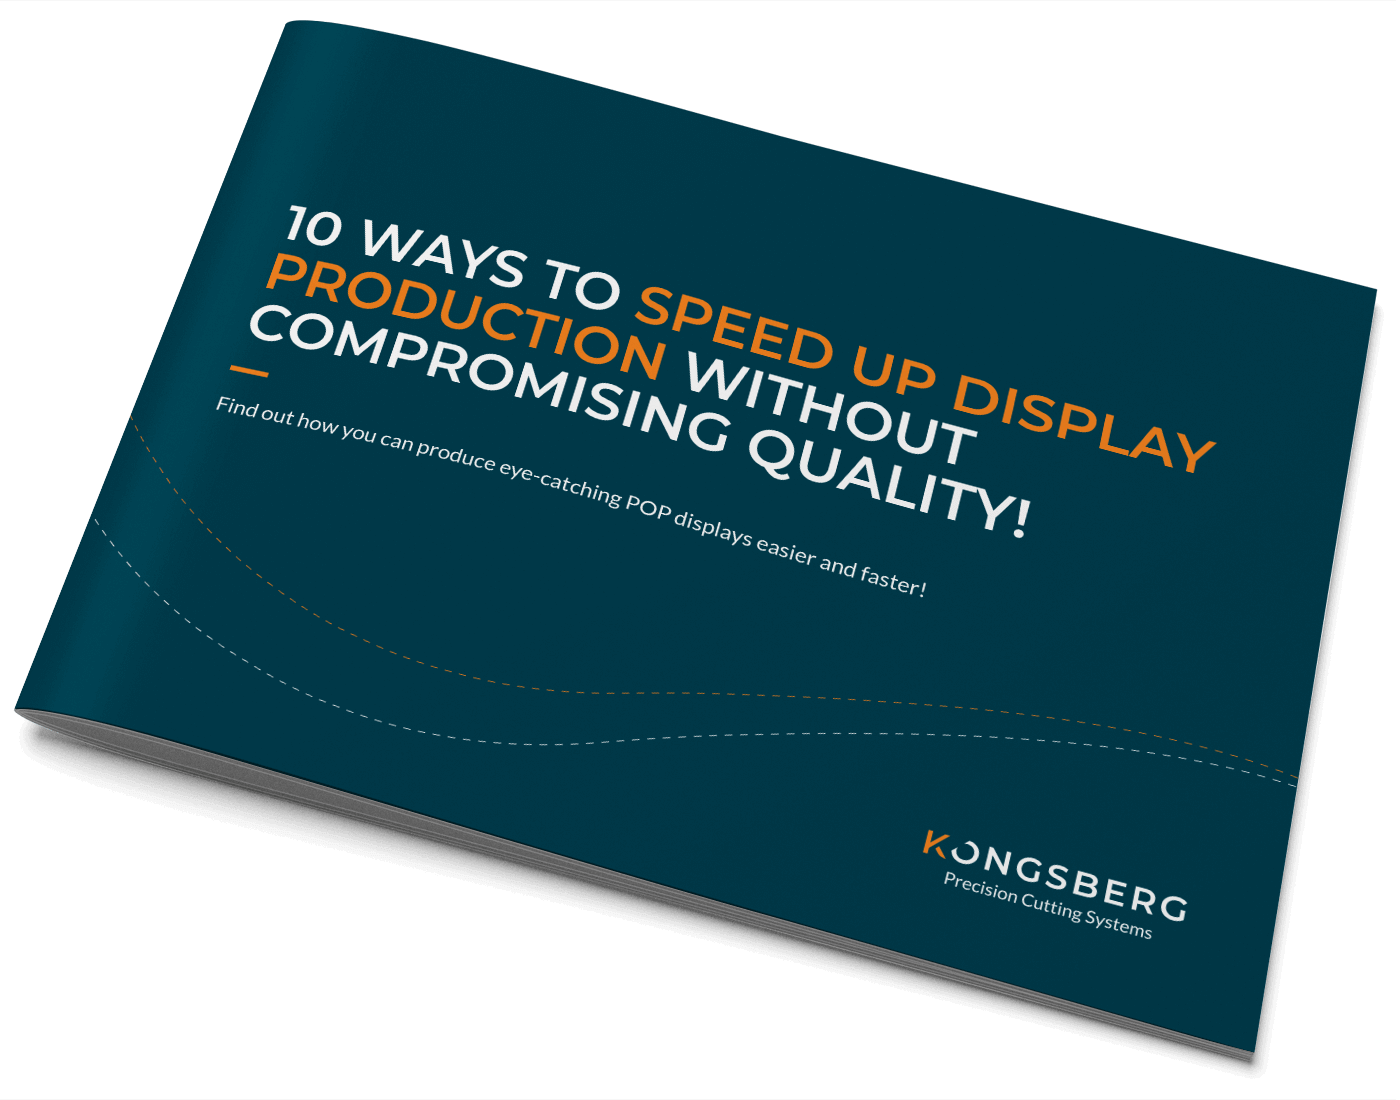 10 ways to speed up display production without compromising quality